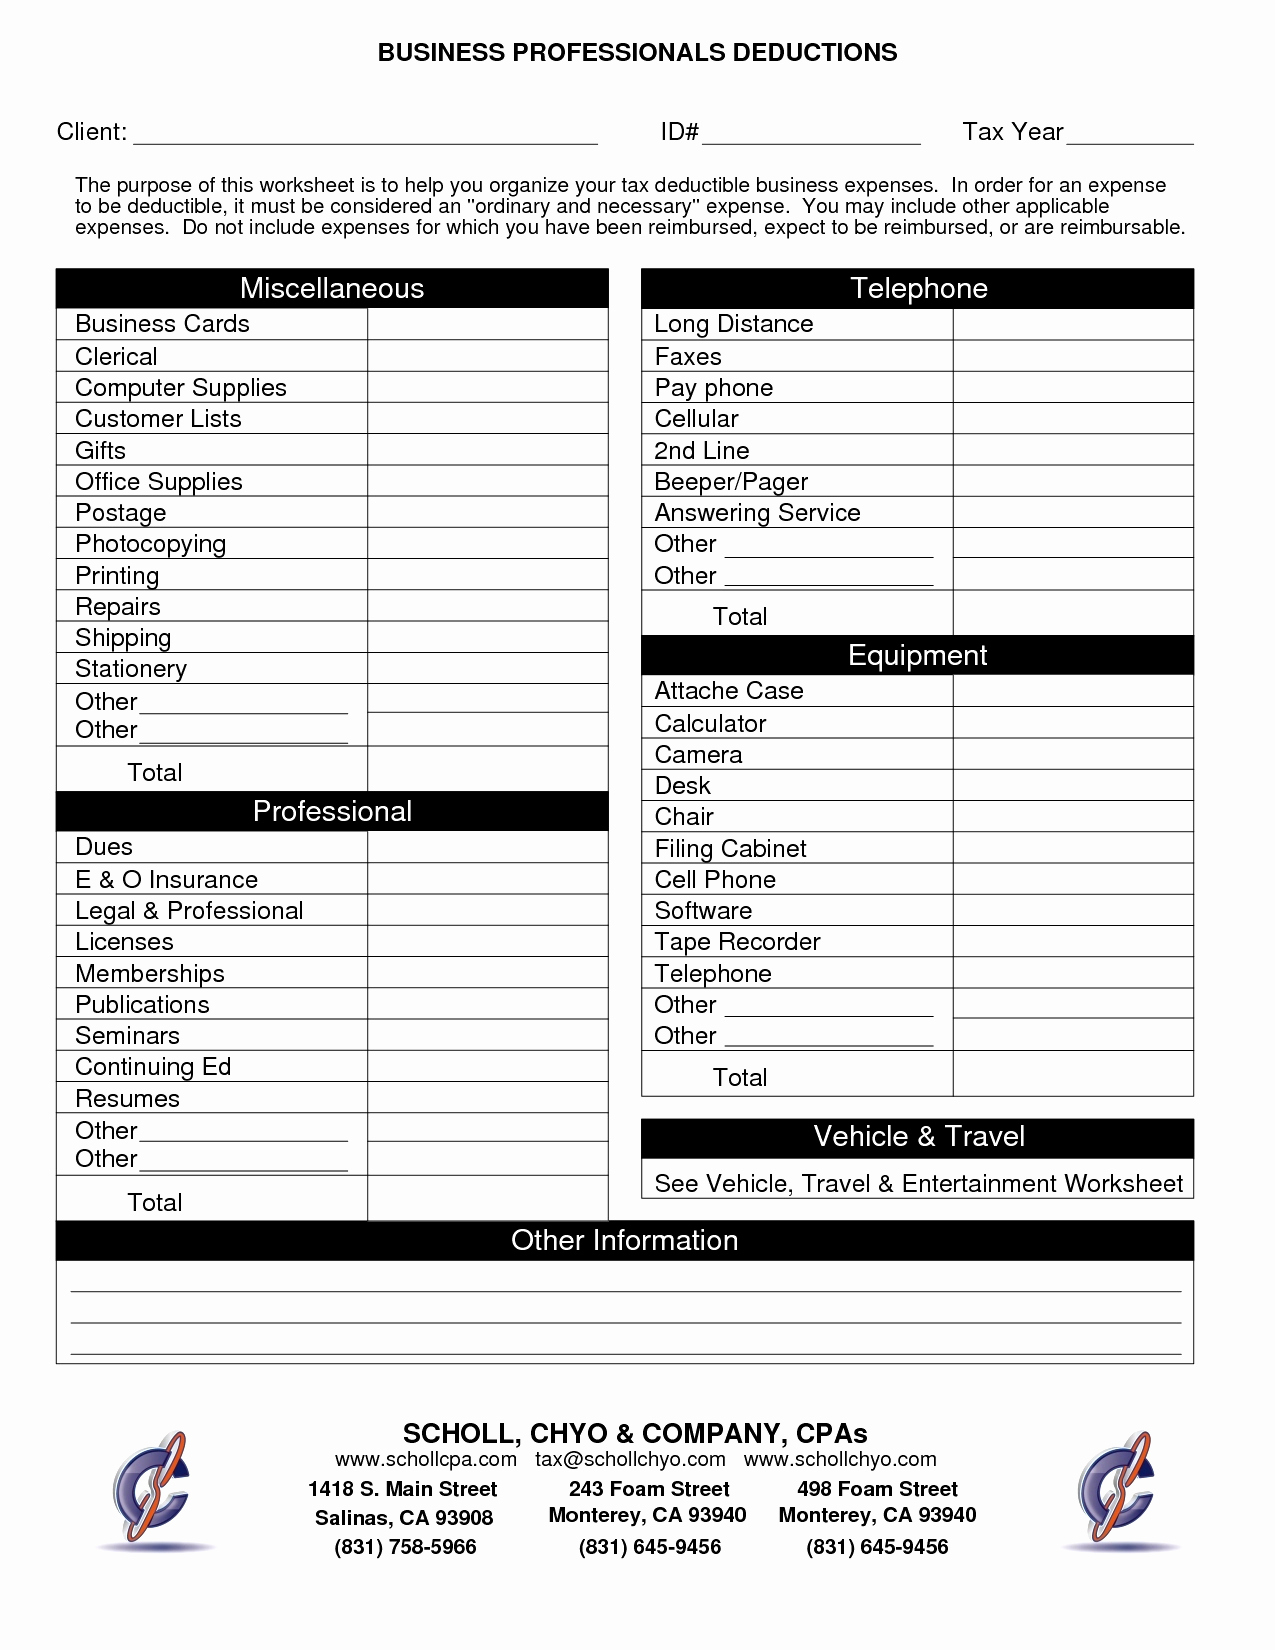 Business Expense Spreadsheet For Taxes Lovely Excel Templates For With Business Expenses Spreadsheet For Taxes